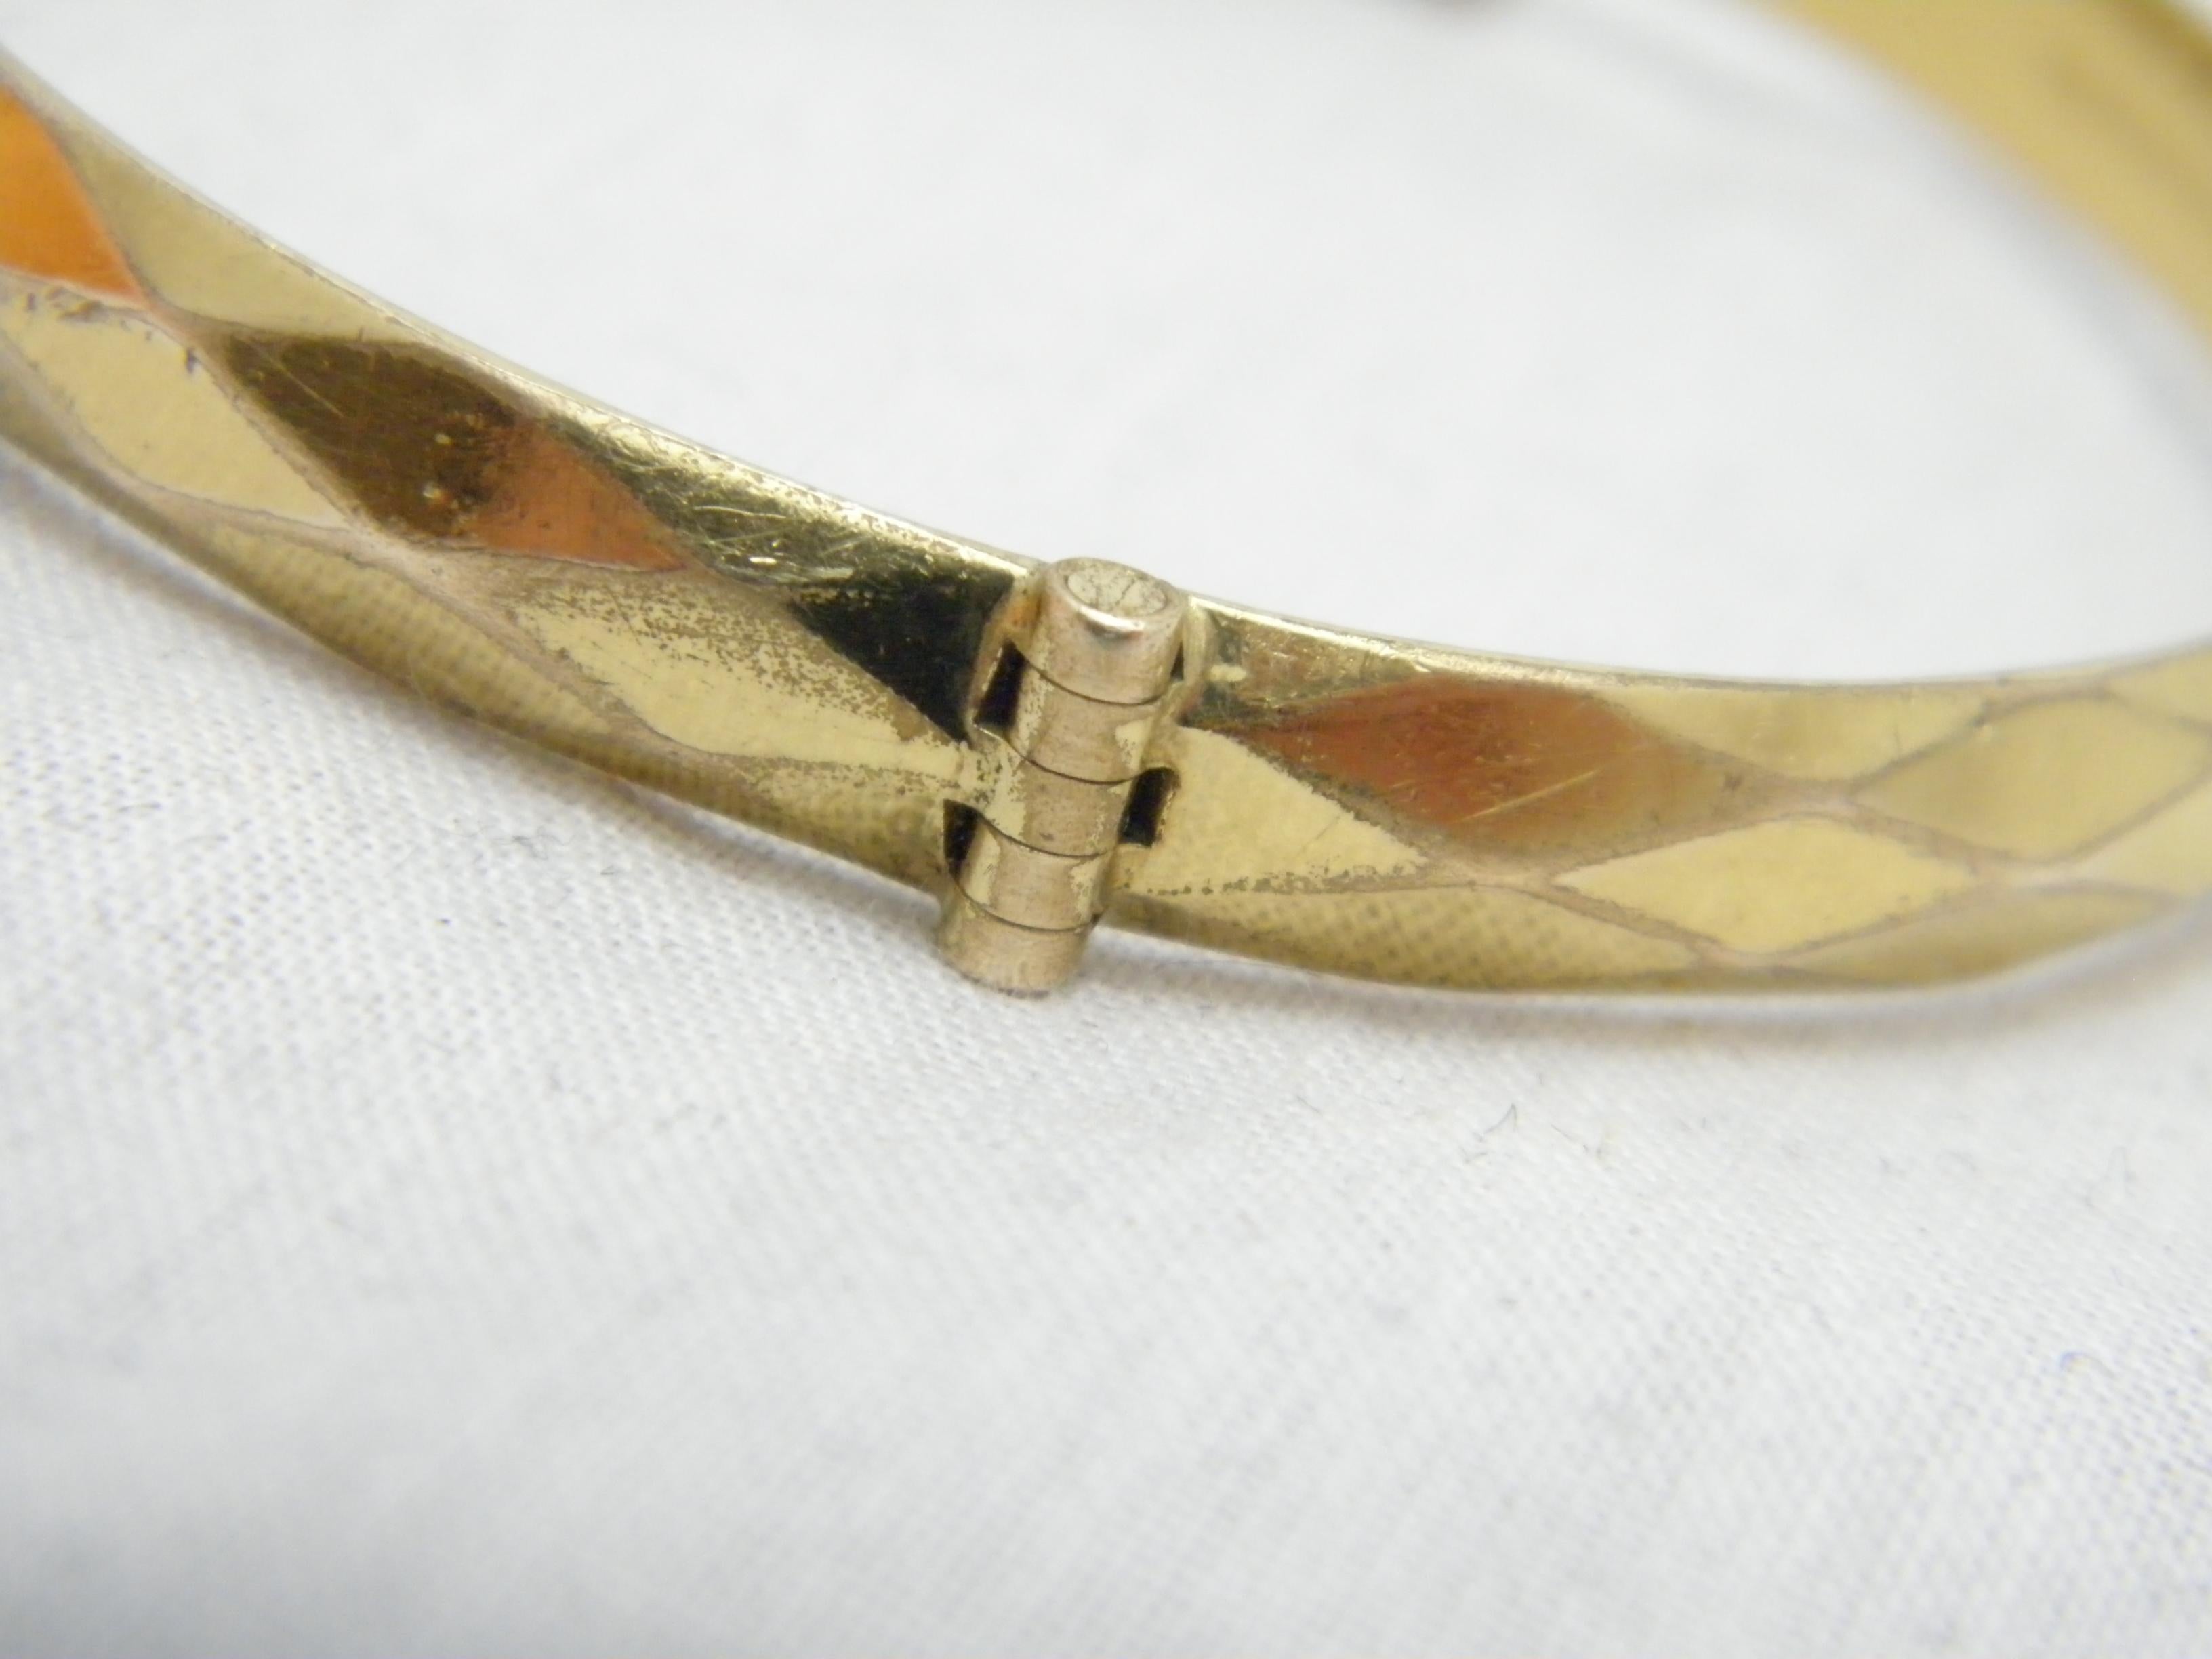 Vintage 9ct Gold 'Metal Cored' Diamond Cut Cuff Hinged Bracelet Bangle 375 In Good Condition For Sale In Camelford, GB